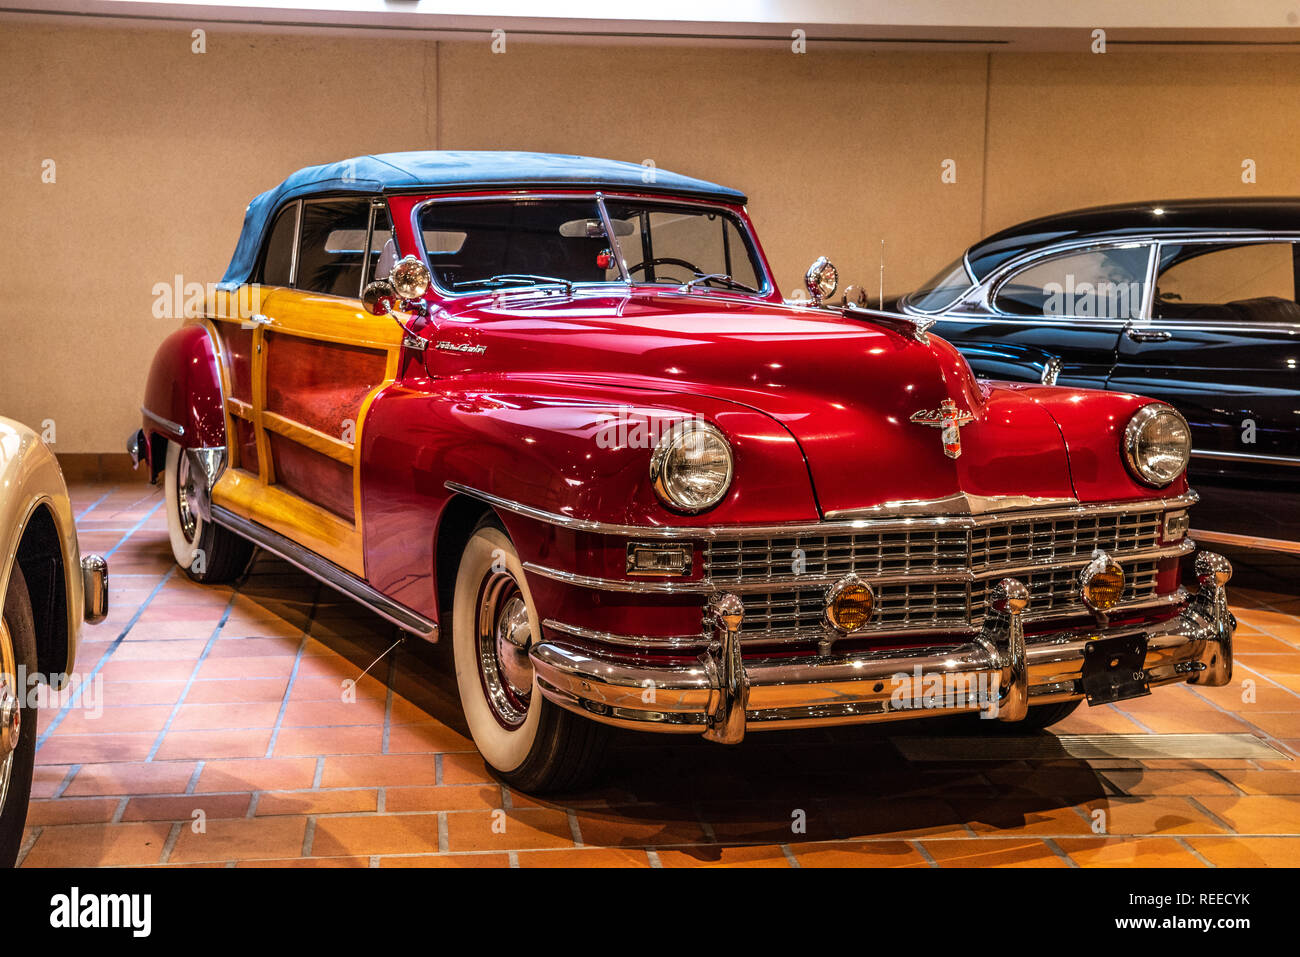 FONTVIEILLE, MONACO - JUN 2017: red CHRYSLER TOWN AND COUNTRY CONVERTIBLE 1947 in Monaco Top Cars Collection Museum. Stock Photo